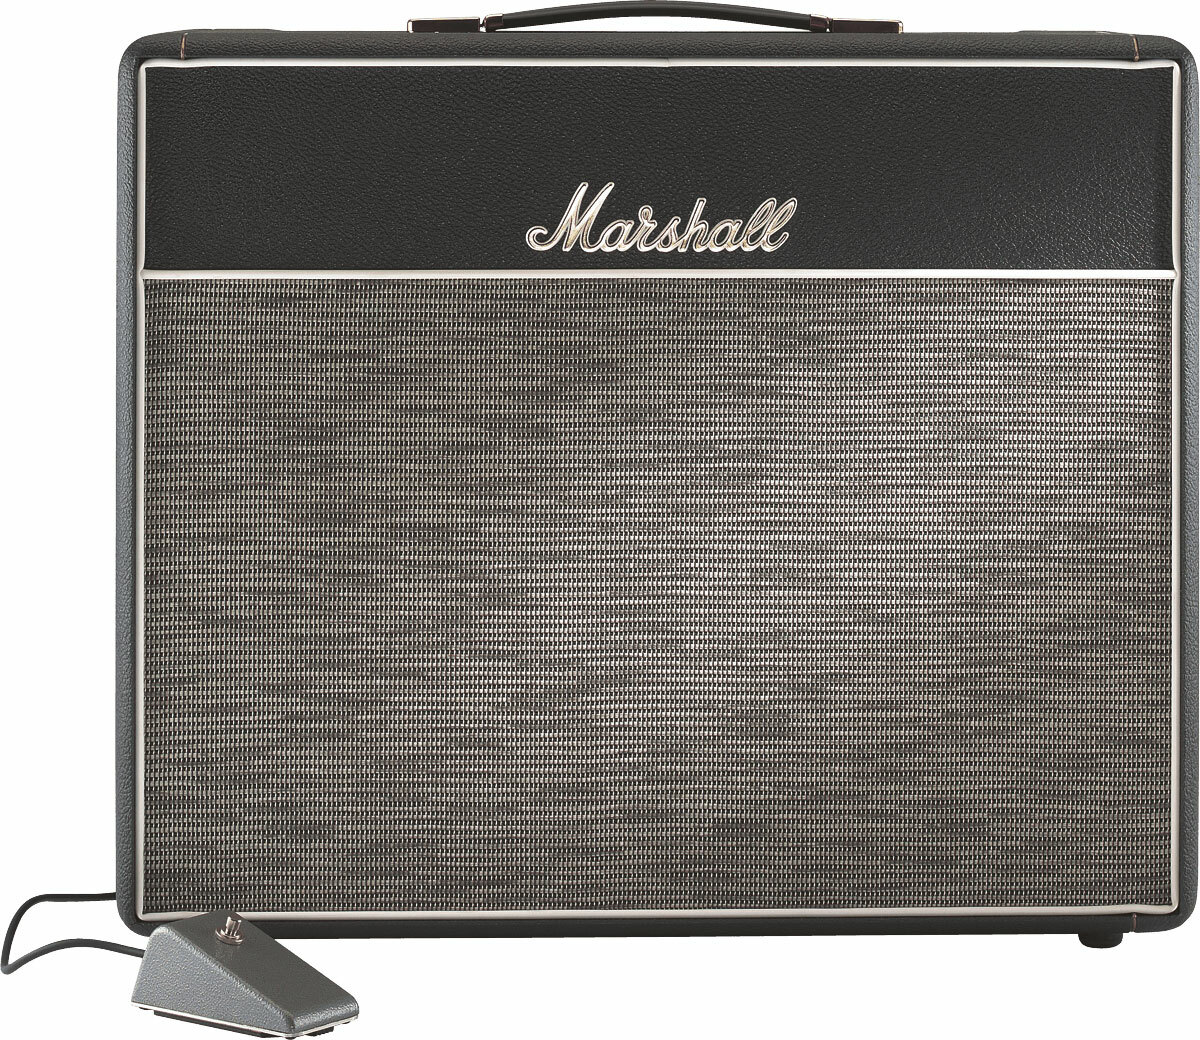 Marshall 1974x Handwired Vintage Reissue 18w 1x12 Black - Electric guitar combo amp - Main picture